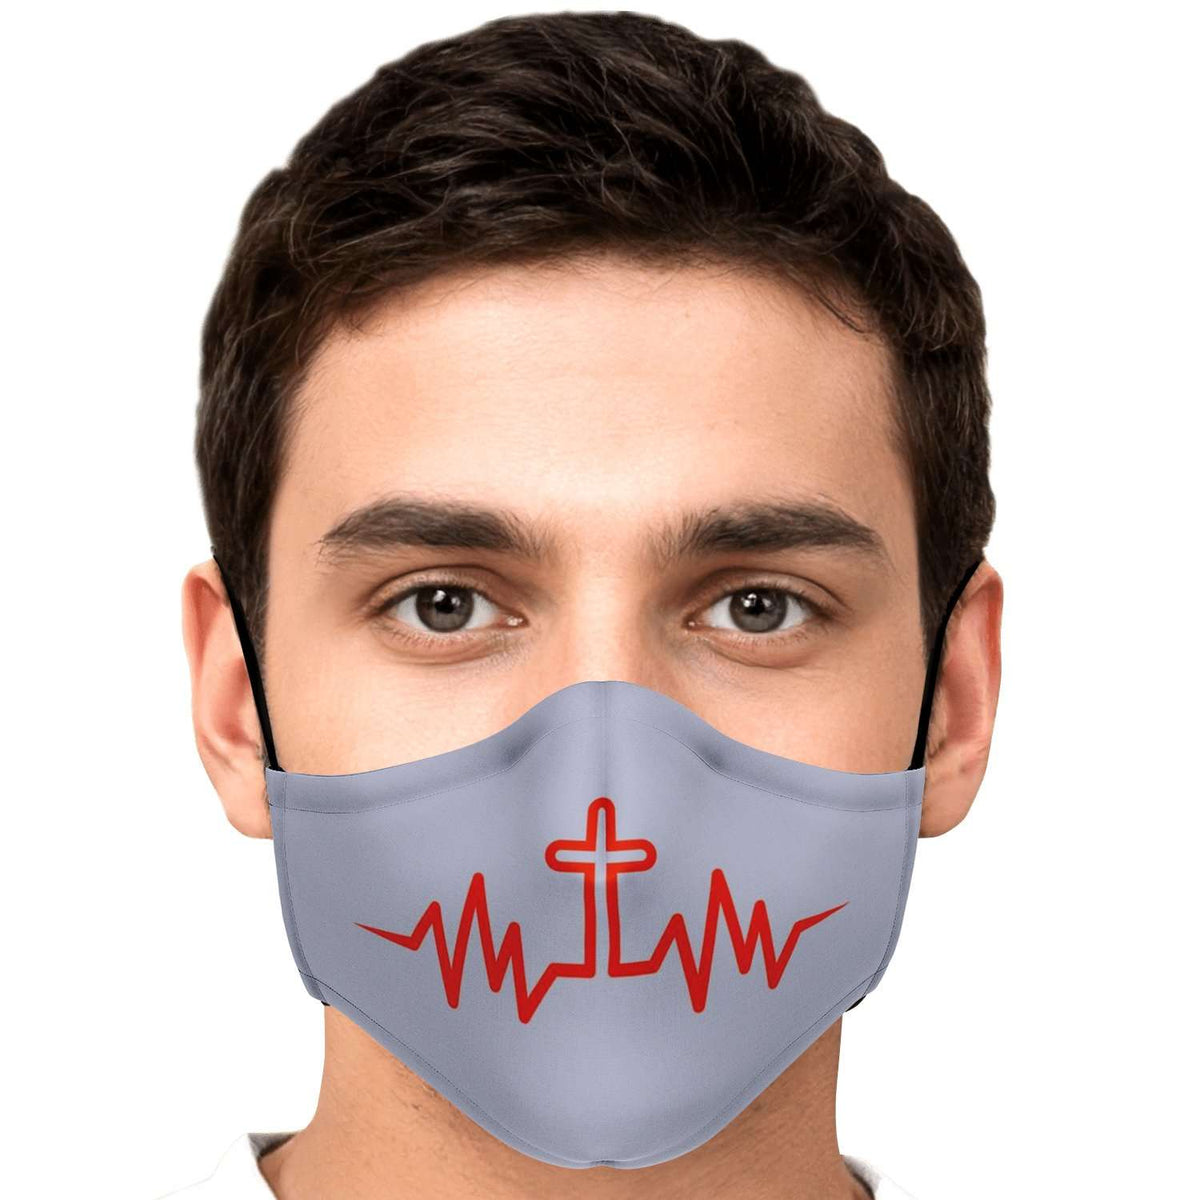 Designs by MyUtopia Shout Out:Christ's Cross in My Heart Beat Fitted Fabric Face Mask with Adjustable Ear Loops and filter pocket,Adult / Single / No filters,Fabric Face Mask